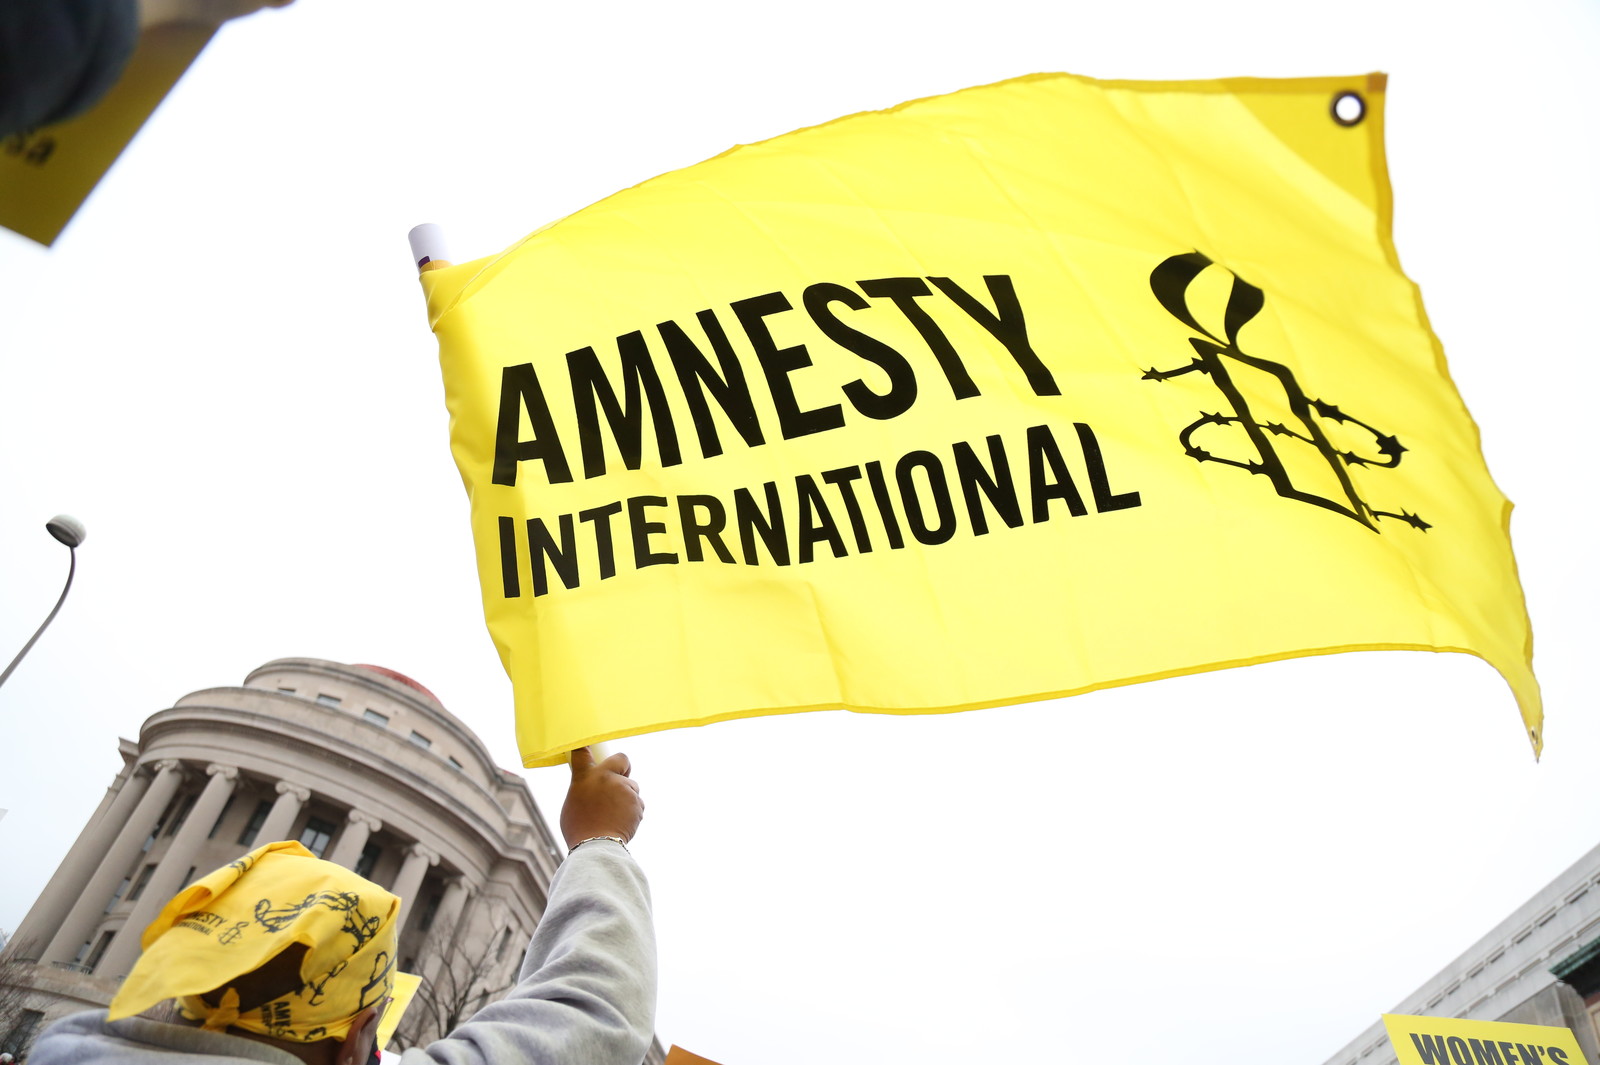 Russia: Authorities close down Amnesty International’s Moscow Office